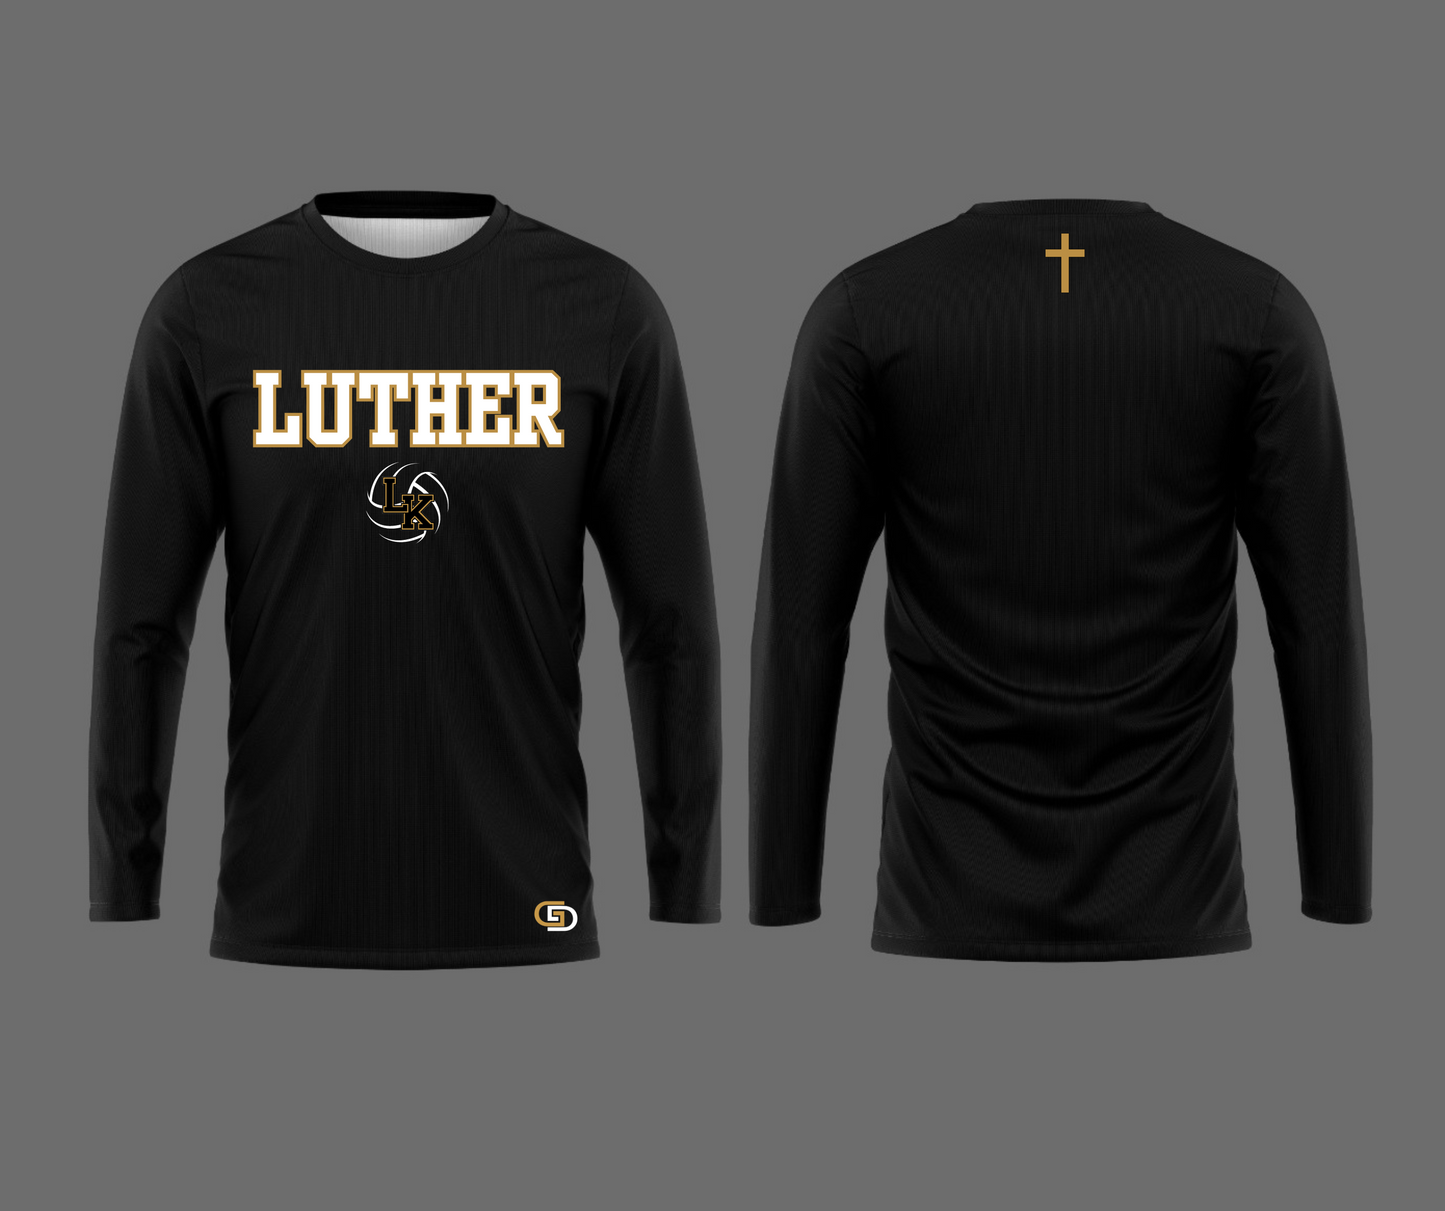 LUTHER KNIGHTS VOLLEYBALL SUBLIMATED SHIRT